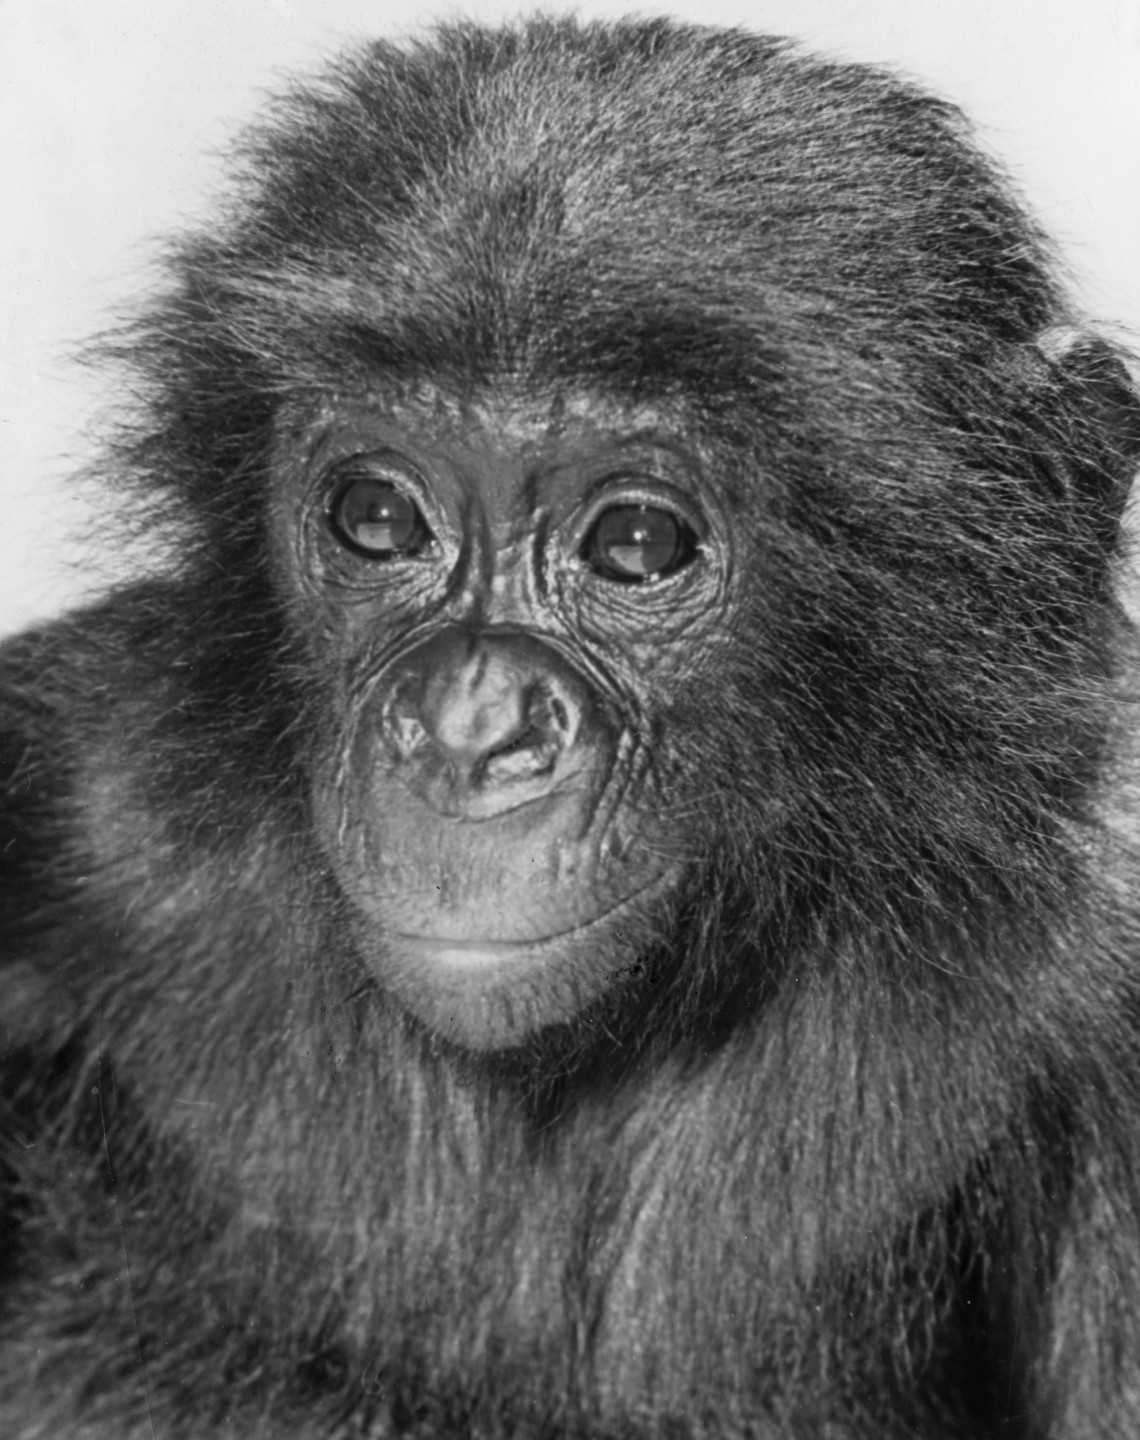 Kakowet, whose name comes from the sound of the French word for peanut, came from the Leopoldville Zoo in the Congo Republic, where he was doted on and given special privileges by Leopoldville Zoo manager Willy Peeters. Kakowet was donated to the San Diego Zoo, and on his flight to the U.S., he was even given the run of the plane and befriended the crew! Once he arrived in San Diego in June 1960, he settled into his new home in the Children's Zoo, and he charmed his way into everyone's affections there, too. And he had plenty of playmates—the little 